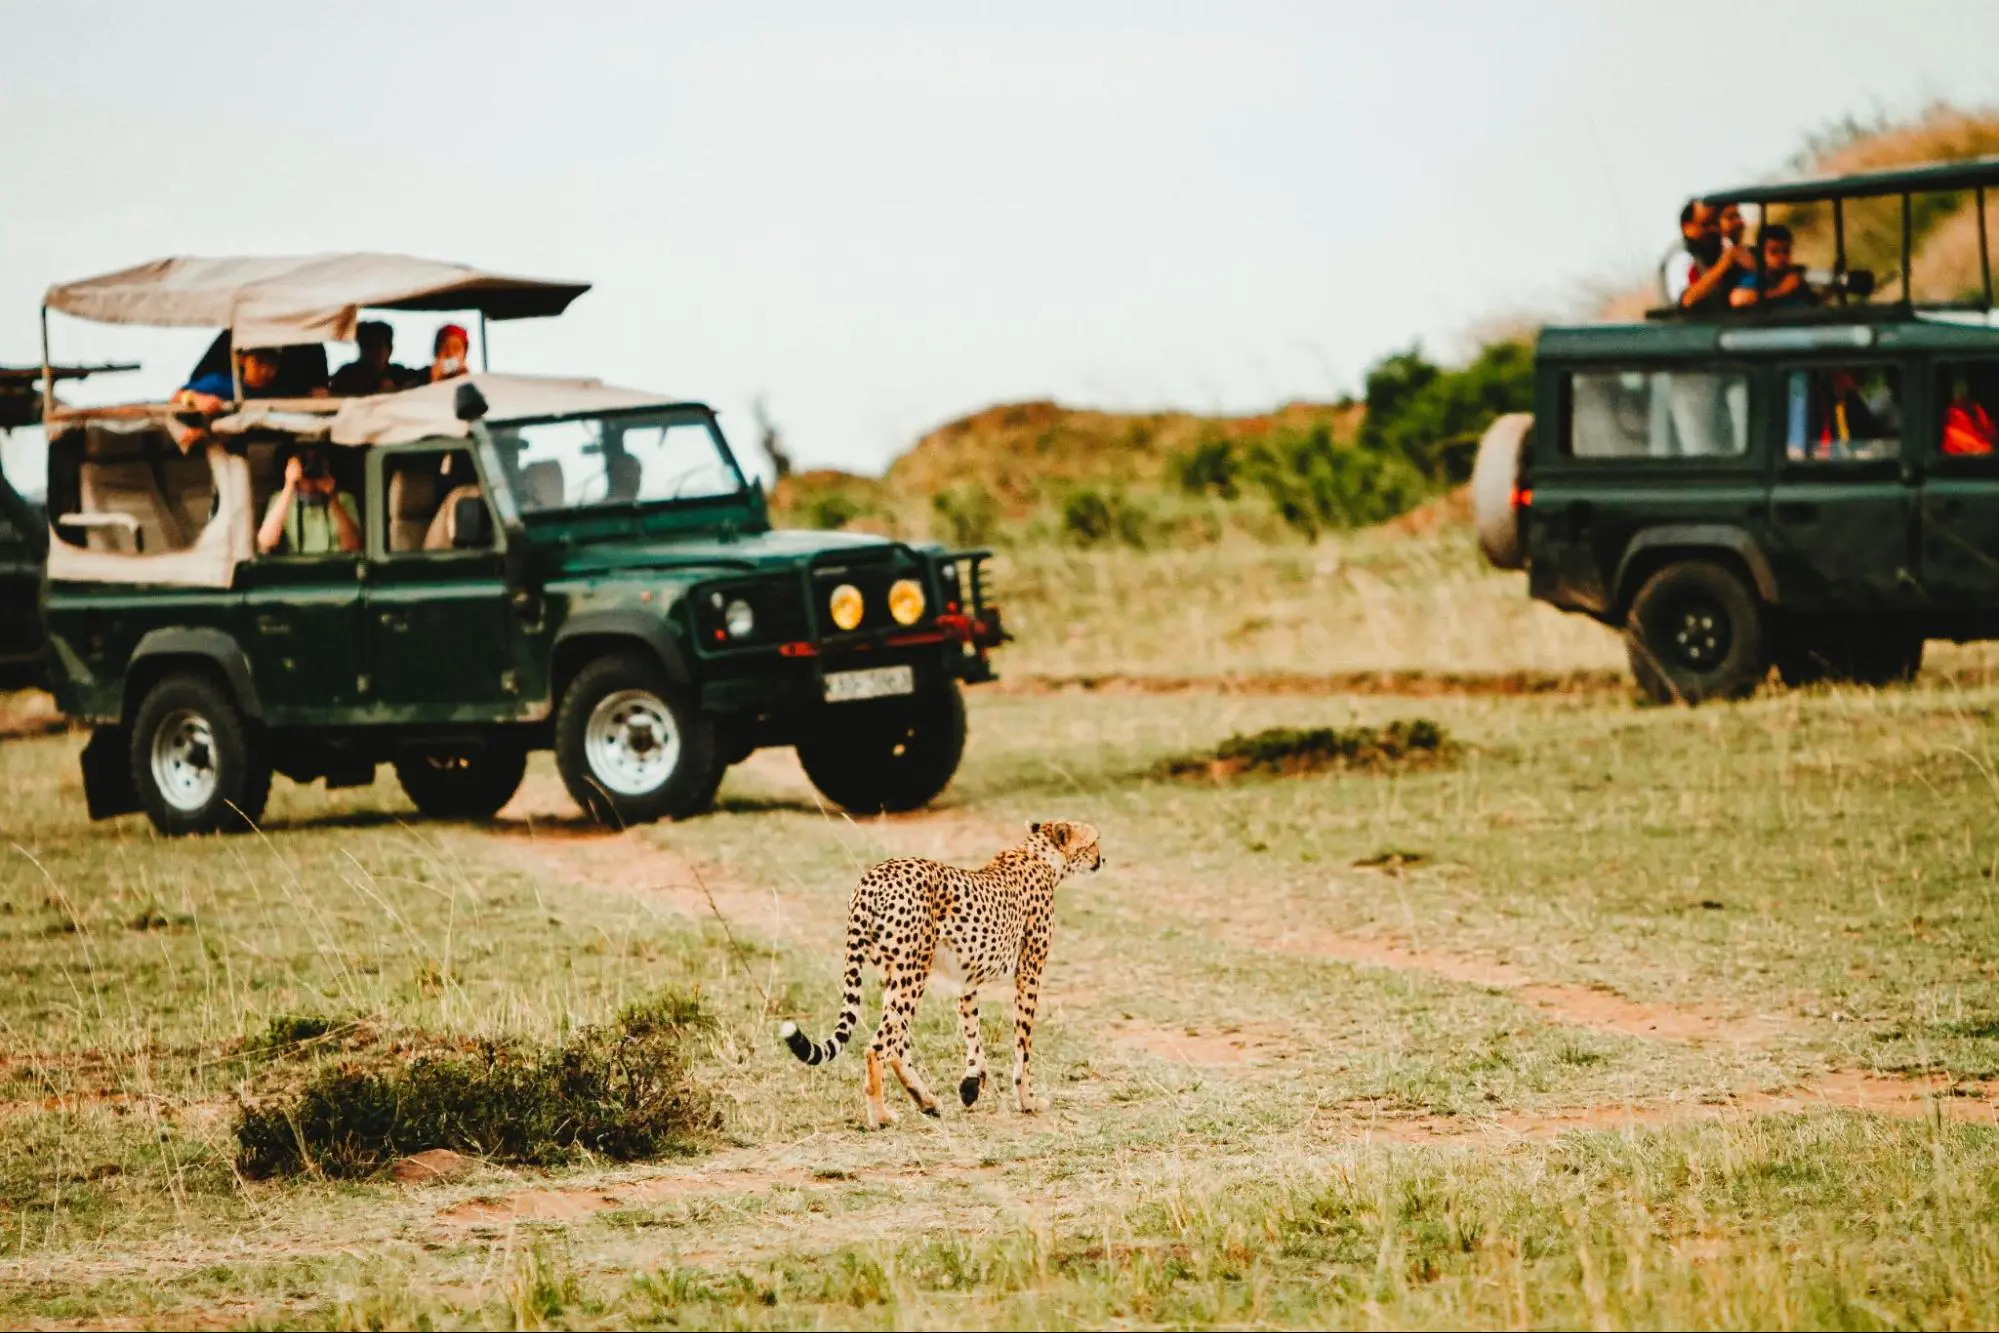 Witness the captivating sight of a cheetah striding through the grass next to a jeep in Serengeti, Tanzania